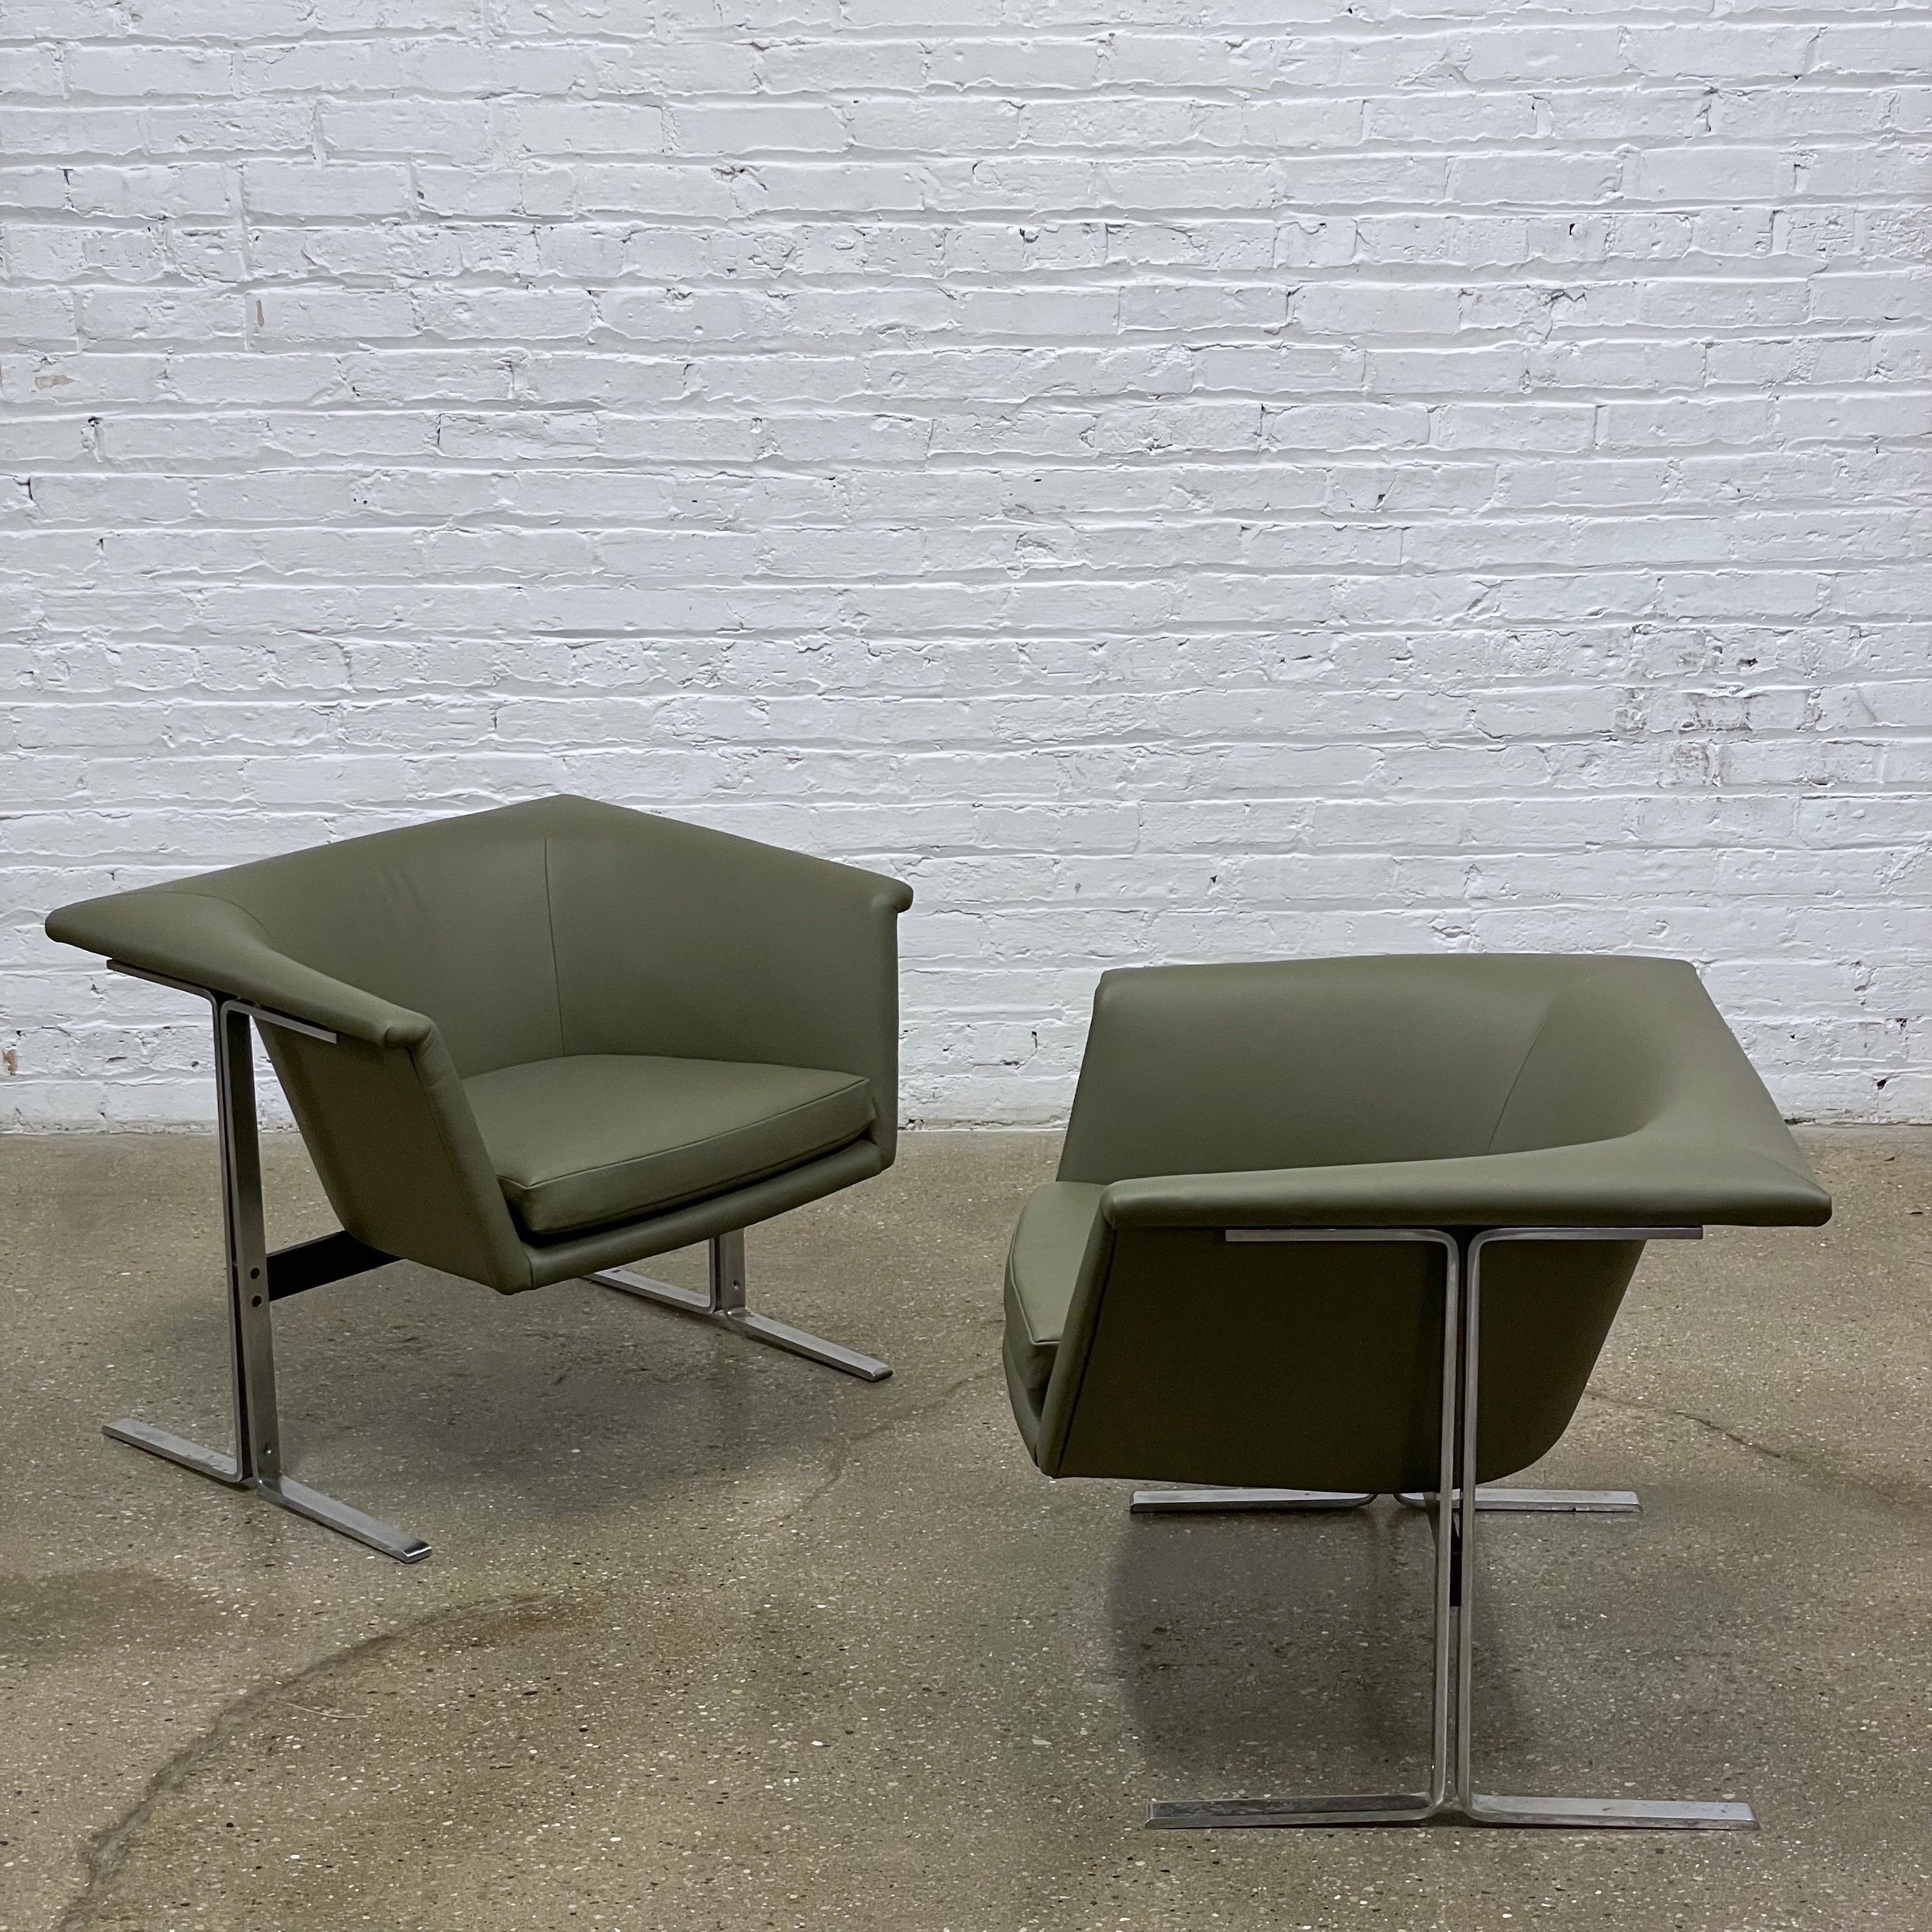 An iconic pair of Artifort Model 042 lounge chairs designed by Geoffrey Harcourt, circa 1960s.

These chairs were used in the conference room scene in Stanley Kubrick’s “2001: A Space Odyssey”. Supposedly these chairs were originally designed for